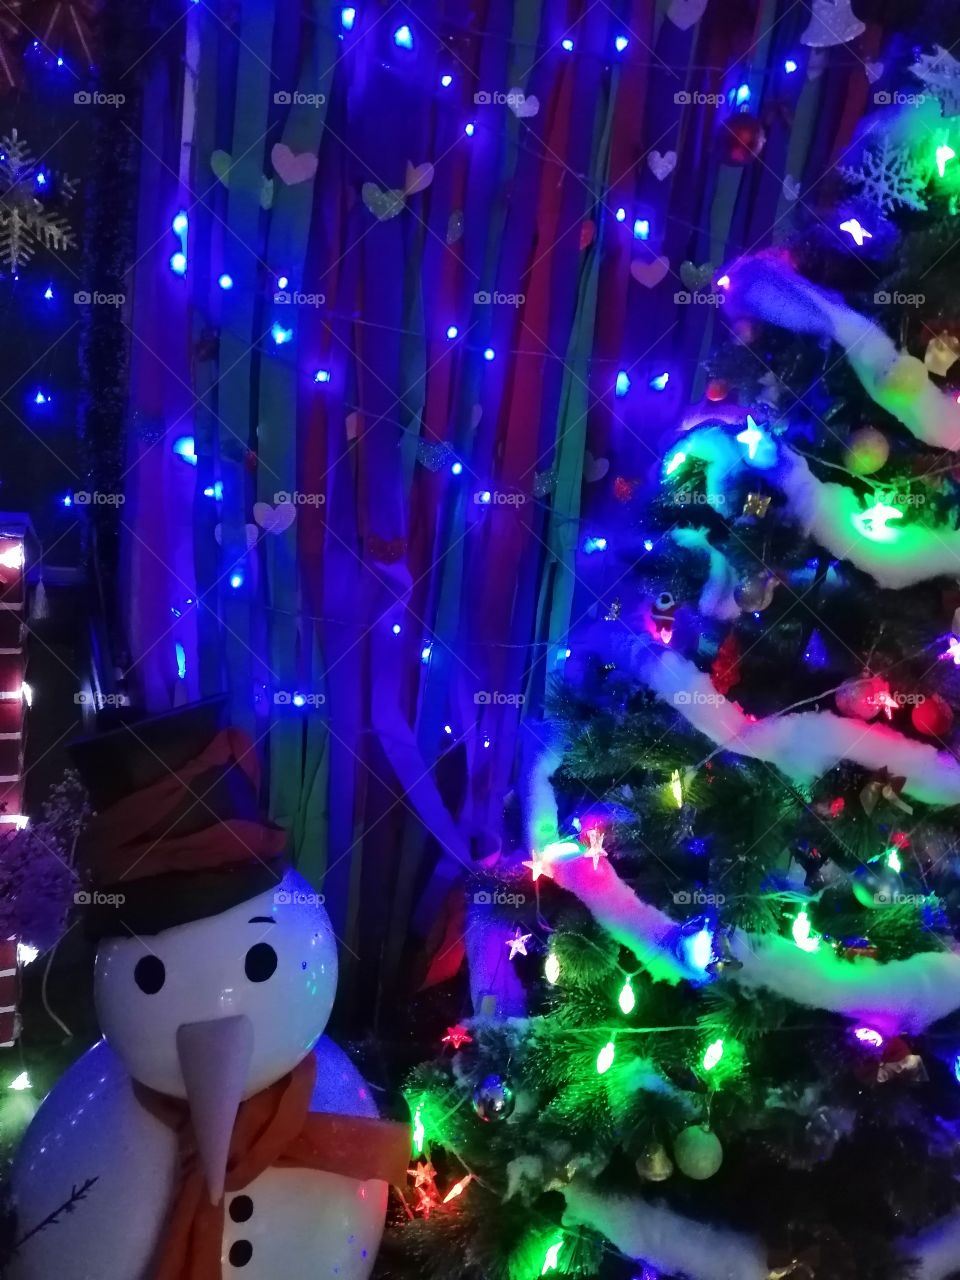 Throwback pic Last year. Christmas corner in our ward